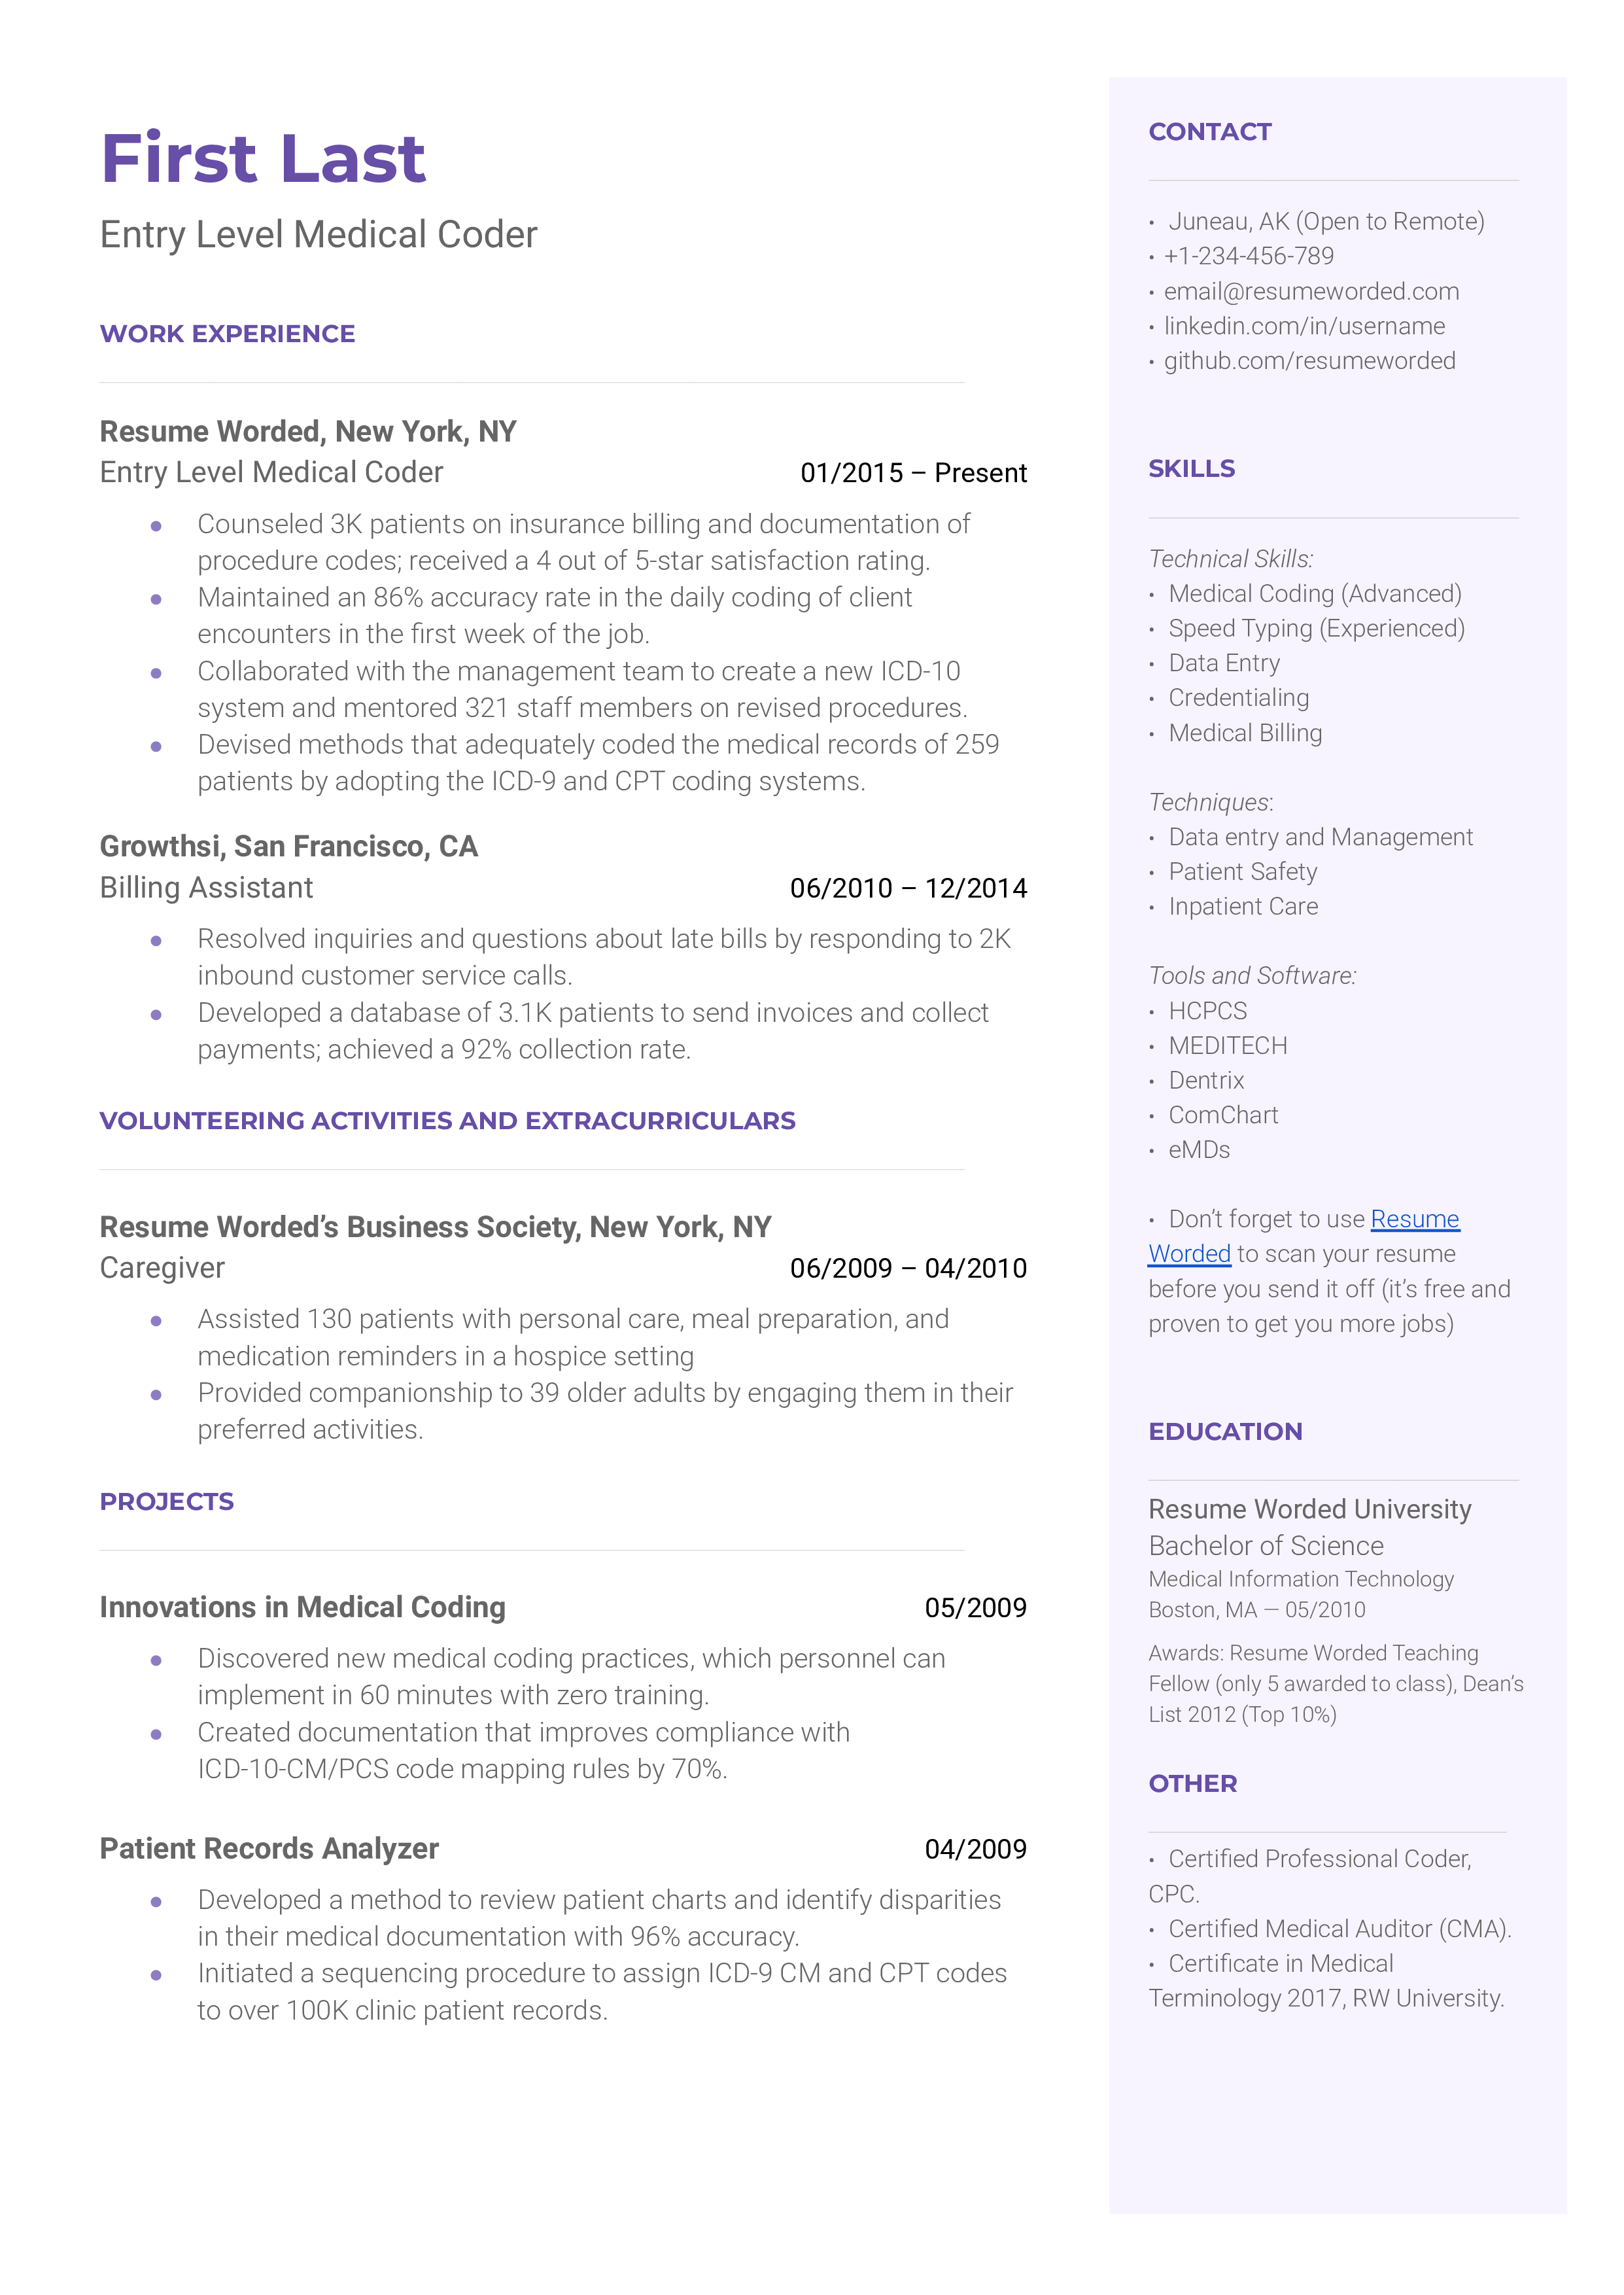 A resume for an entry level medical coder with a degree in medical information technology and experience as a billing assistant.